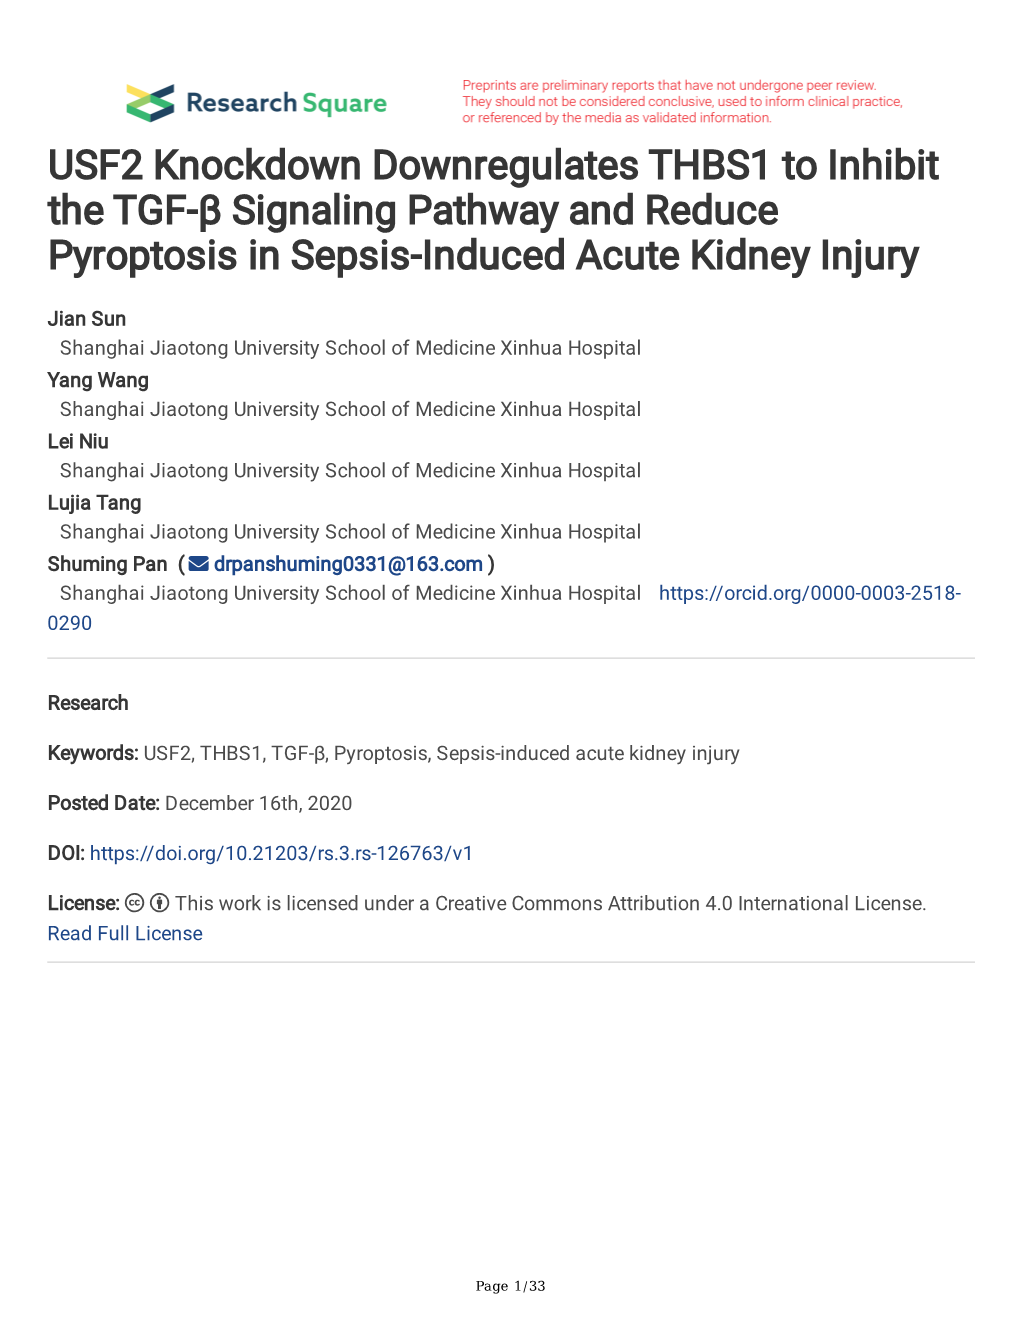 USF2 Knockdown Downregulates THBS1 to Inhibit the TGF-Β Signaling Pathway and Reduce Pyroptosis in Sepsis-Induced Acute Kidney Injury